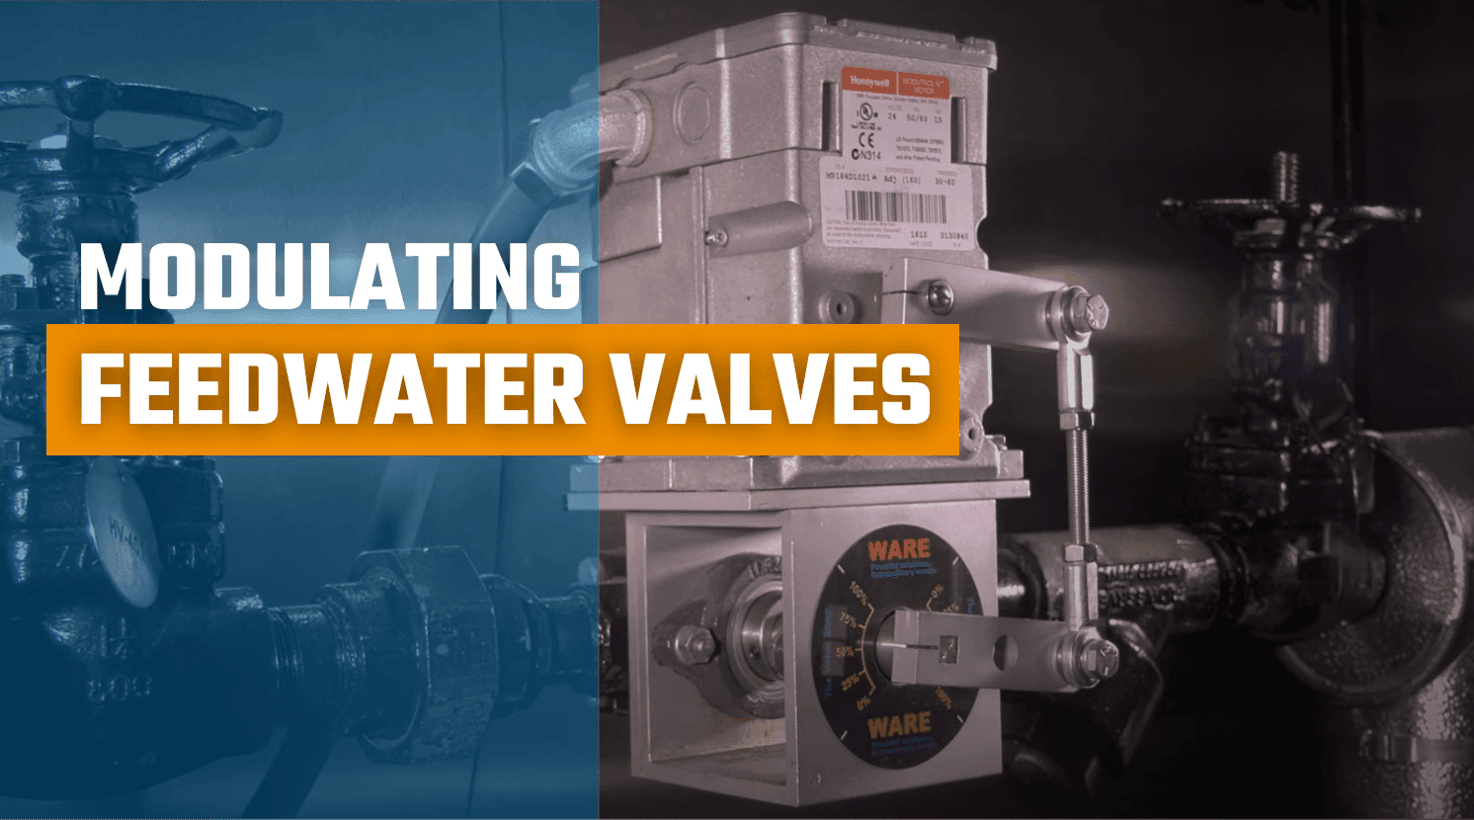 Modulating Feedwater Valves: The Method Behind the Movement